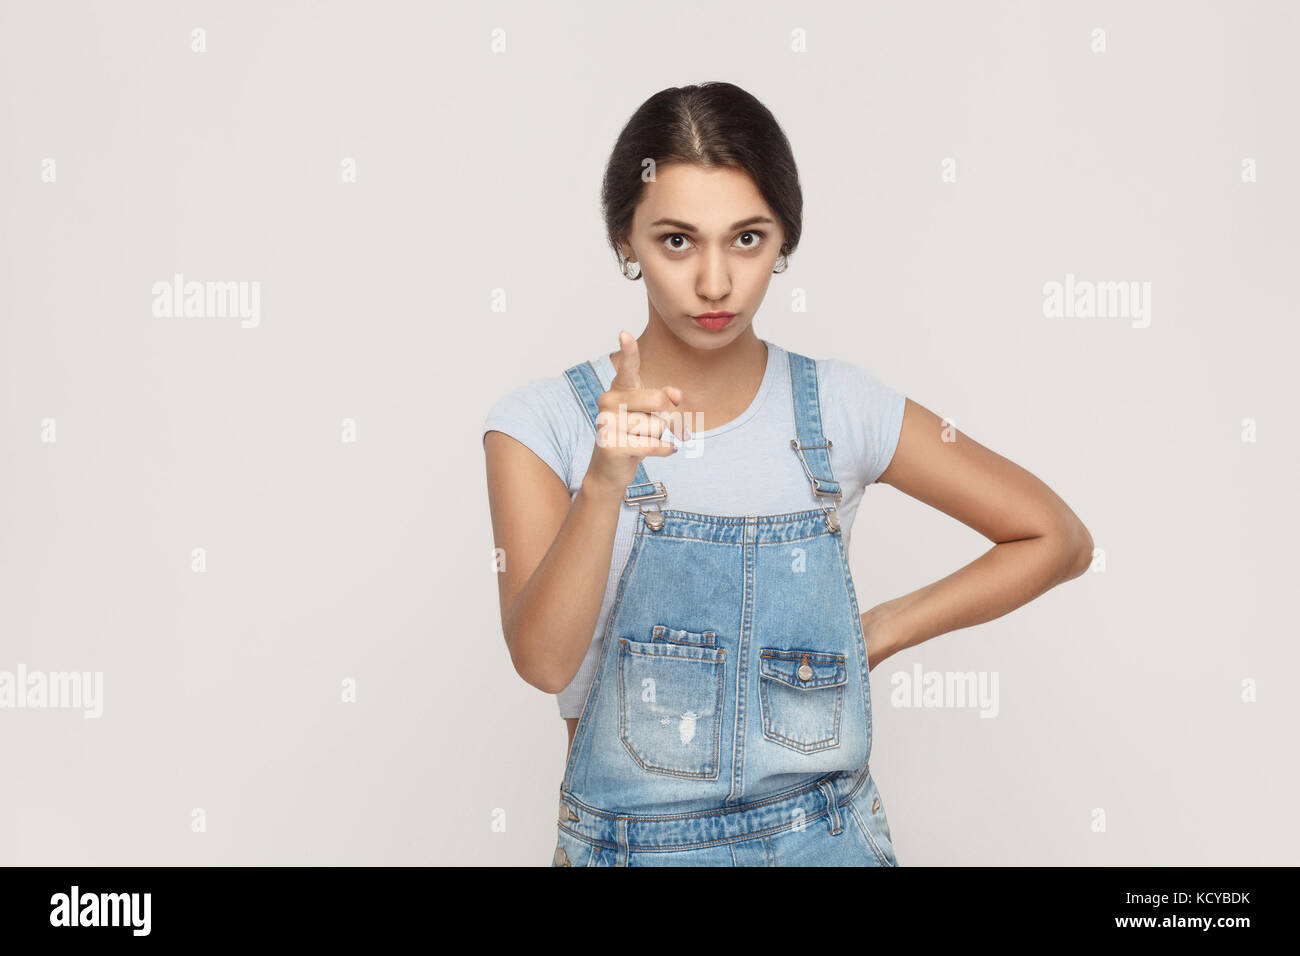 Warning sign. Young adult middle eastern woman, looking at camera with serious face and finger warning. Studio shot. Gray background. Stock Photo